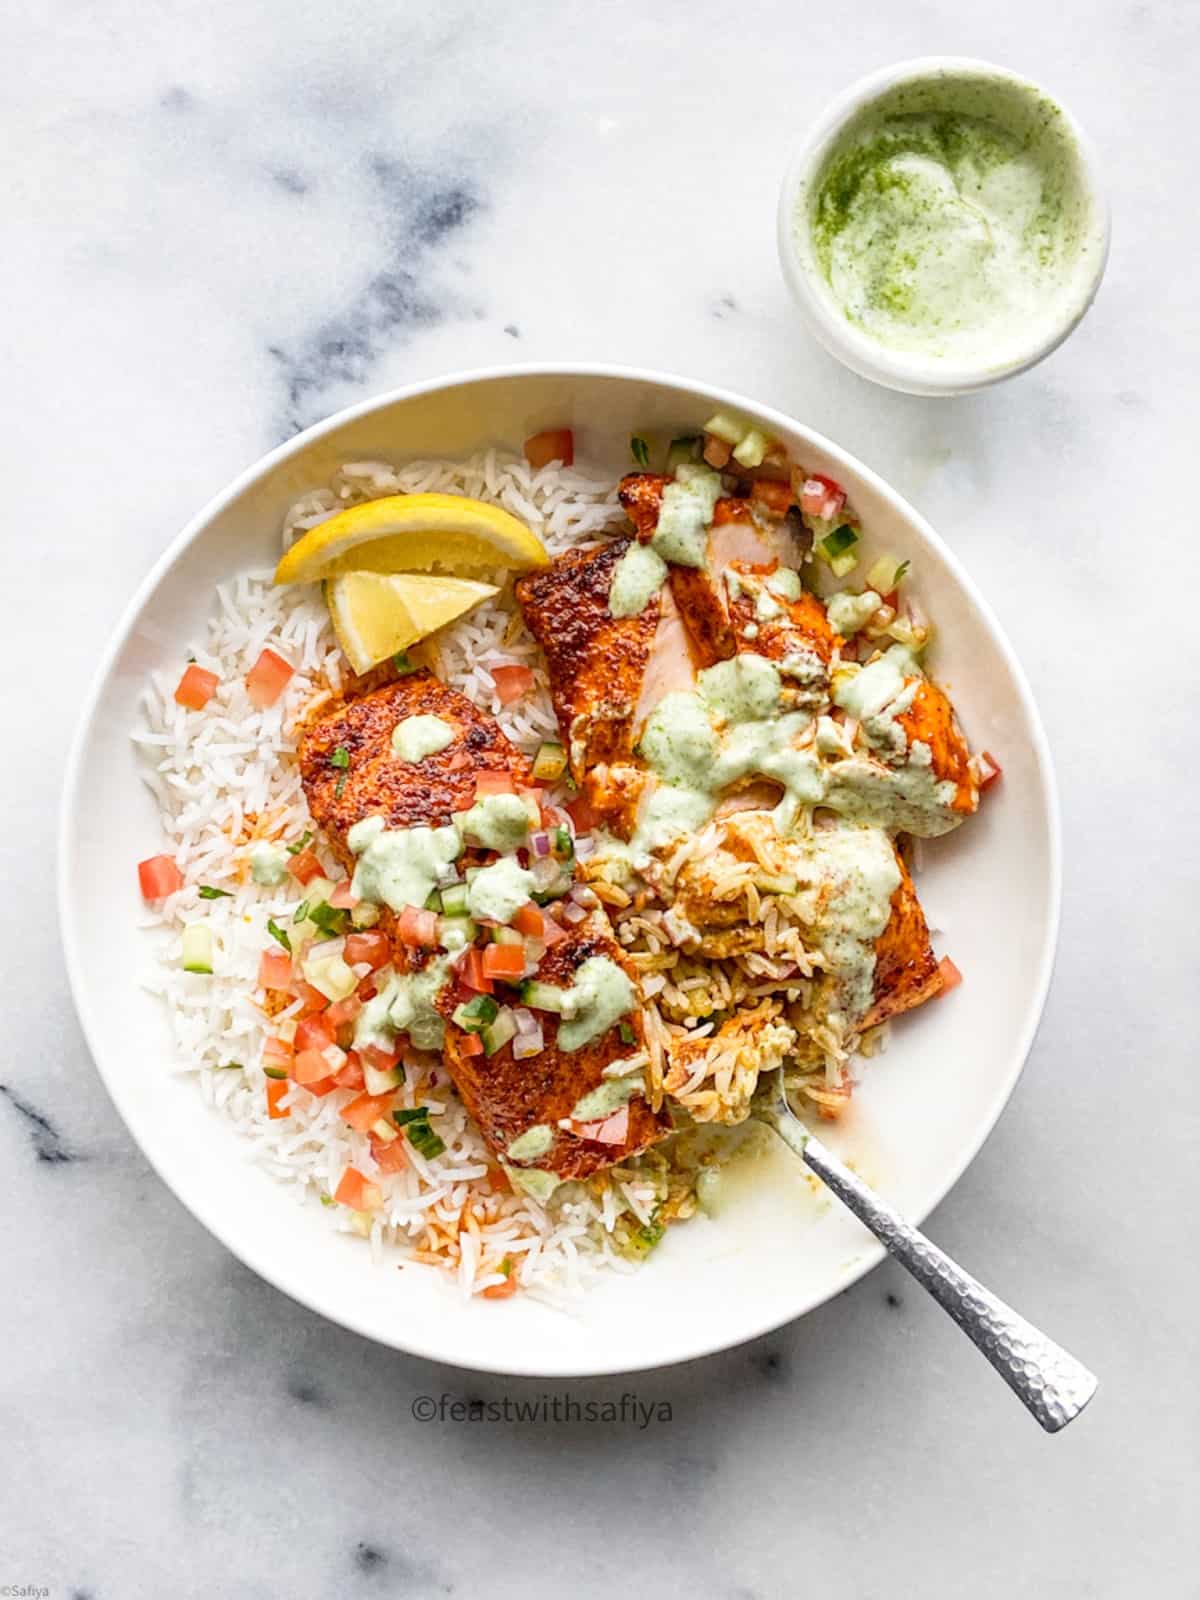 Salmon tikka with rice in a bowl